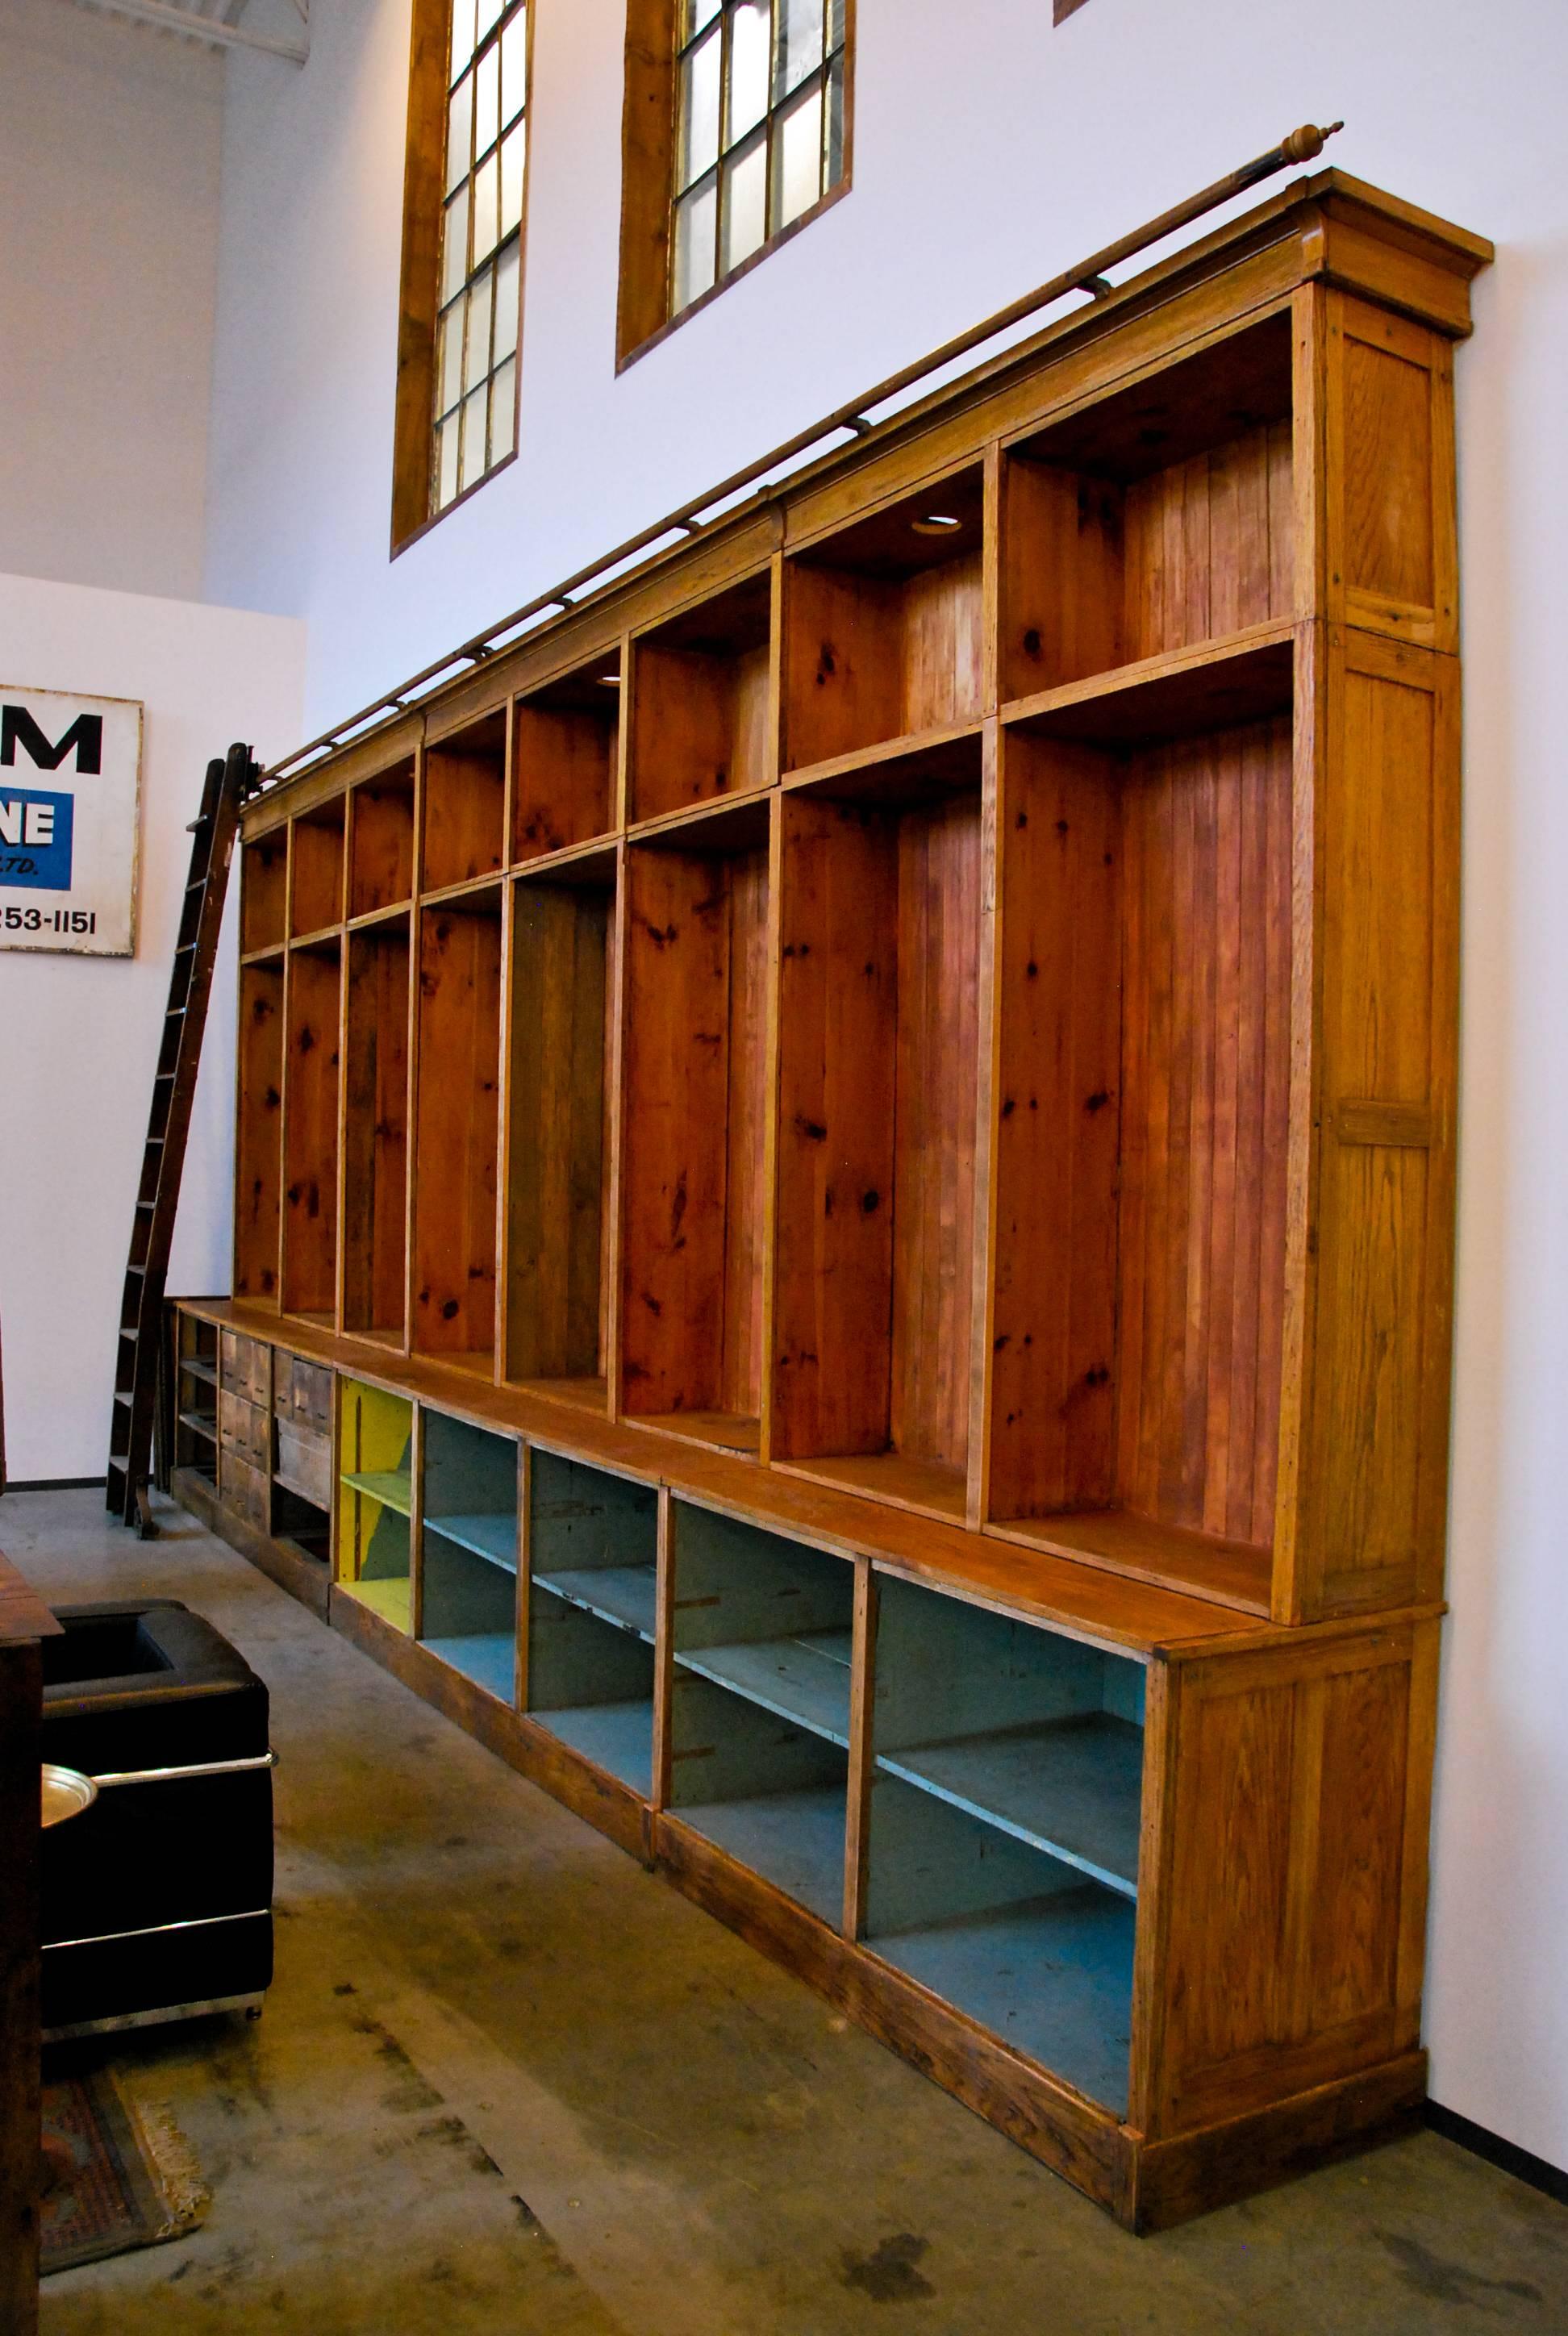 A fantastic 20-foot wide store cabinet with oak front, multiple compartments, and original rolling ladder and hardware. This unique piece was salvaged from a 1920 hardware store in Canada. The cabinet breaks down into sections for easier set-up and